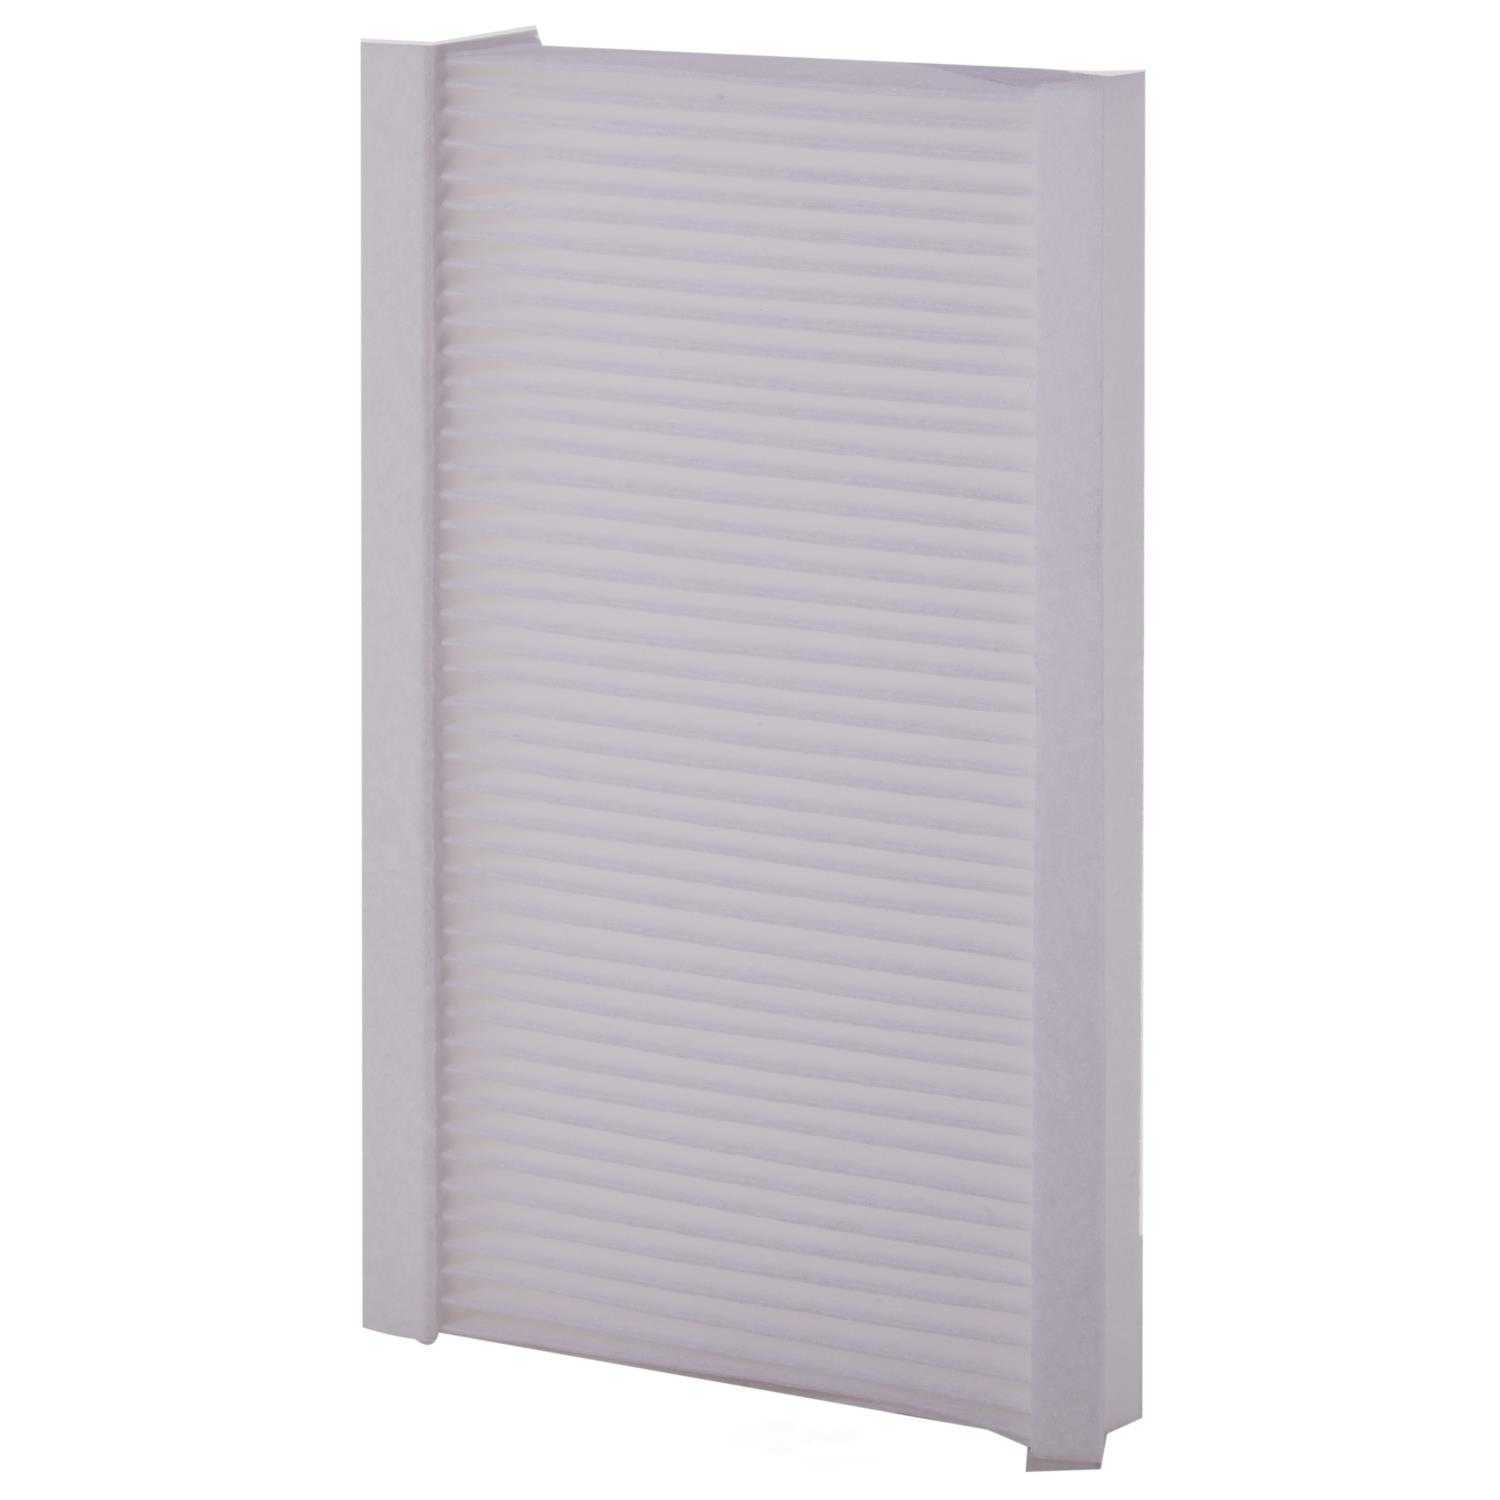 Cabin Air Filter-Particulate Media Pronto PC9369